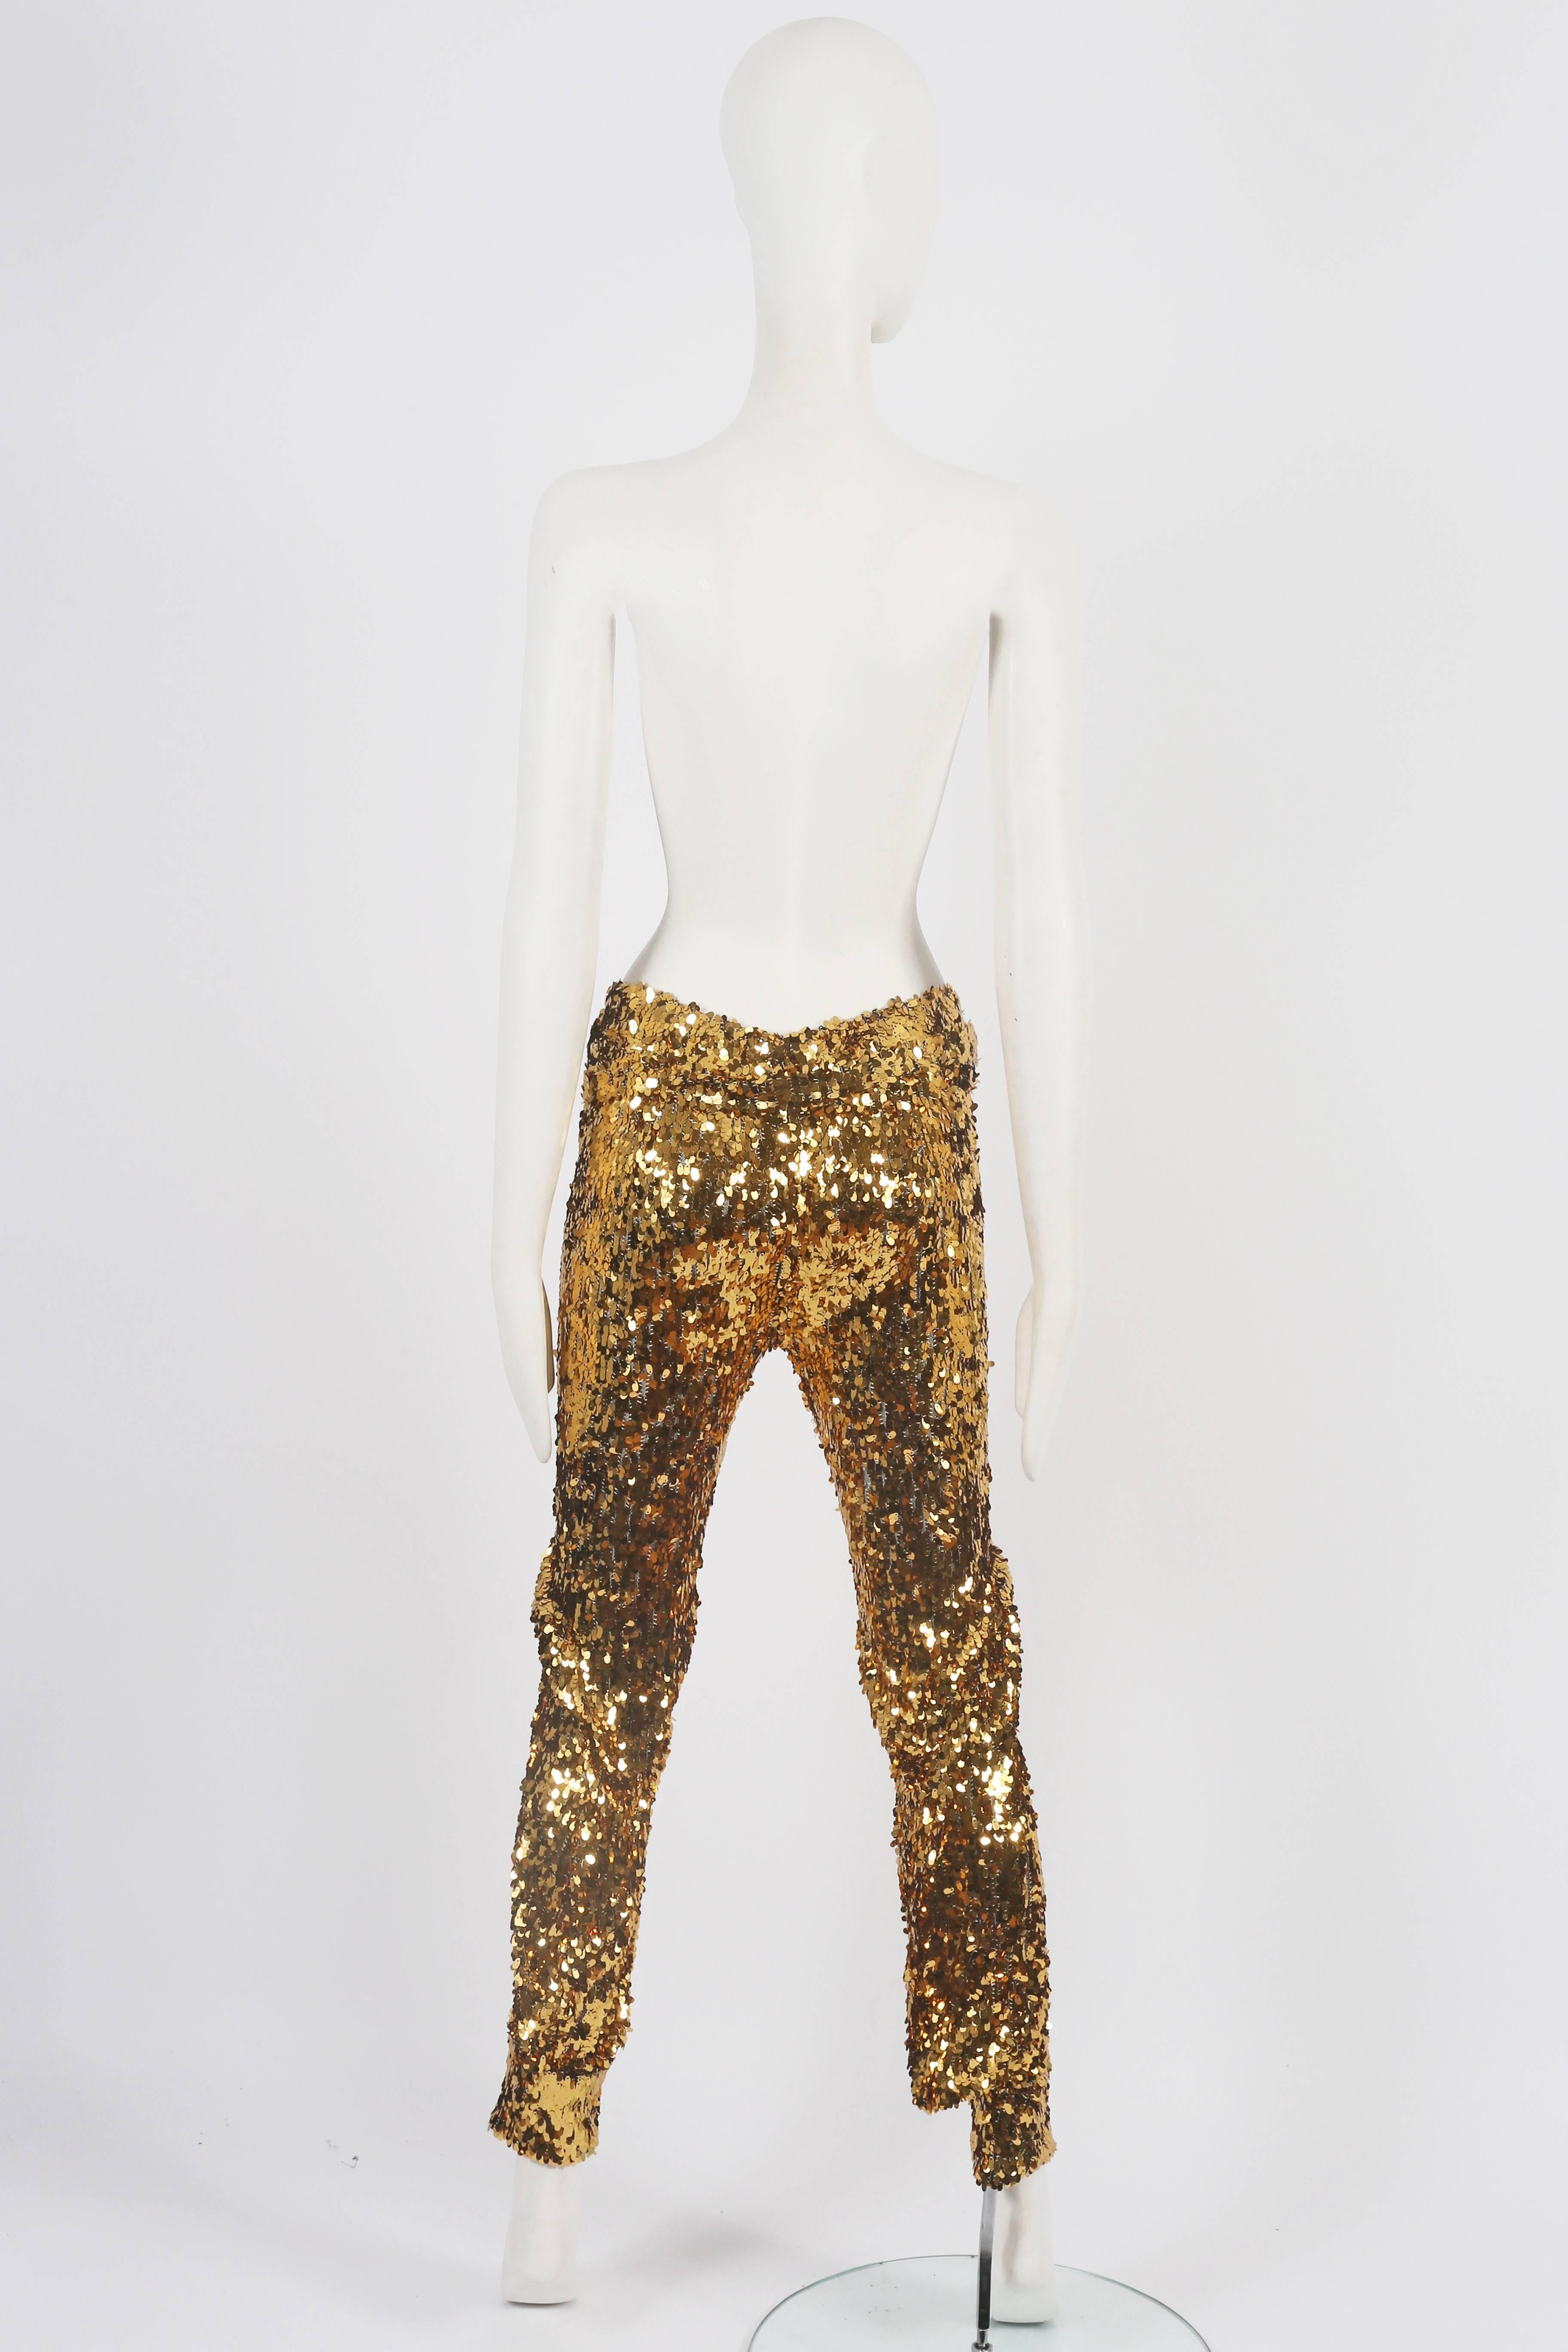 Vivienne Westwood gold sequinned evening pants, circa 2011 1